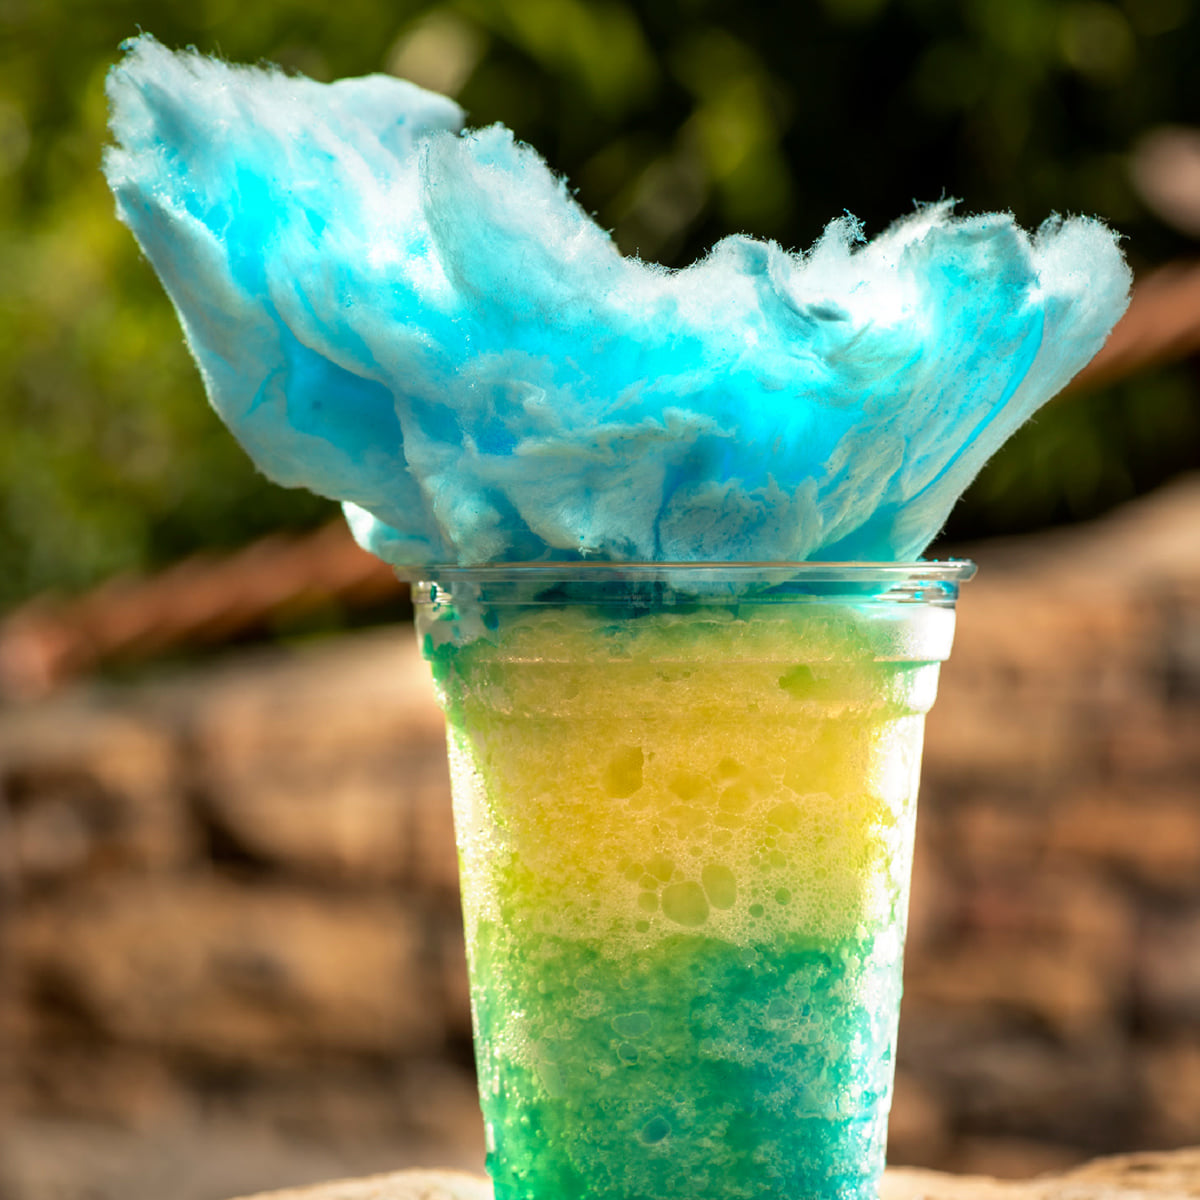 Try the Cotton Top Lagoon from Isle of Java at Disney’s Animal Kingdom